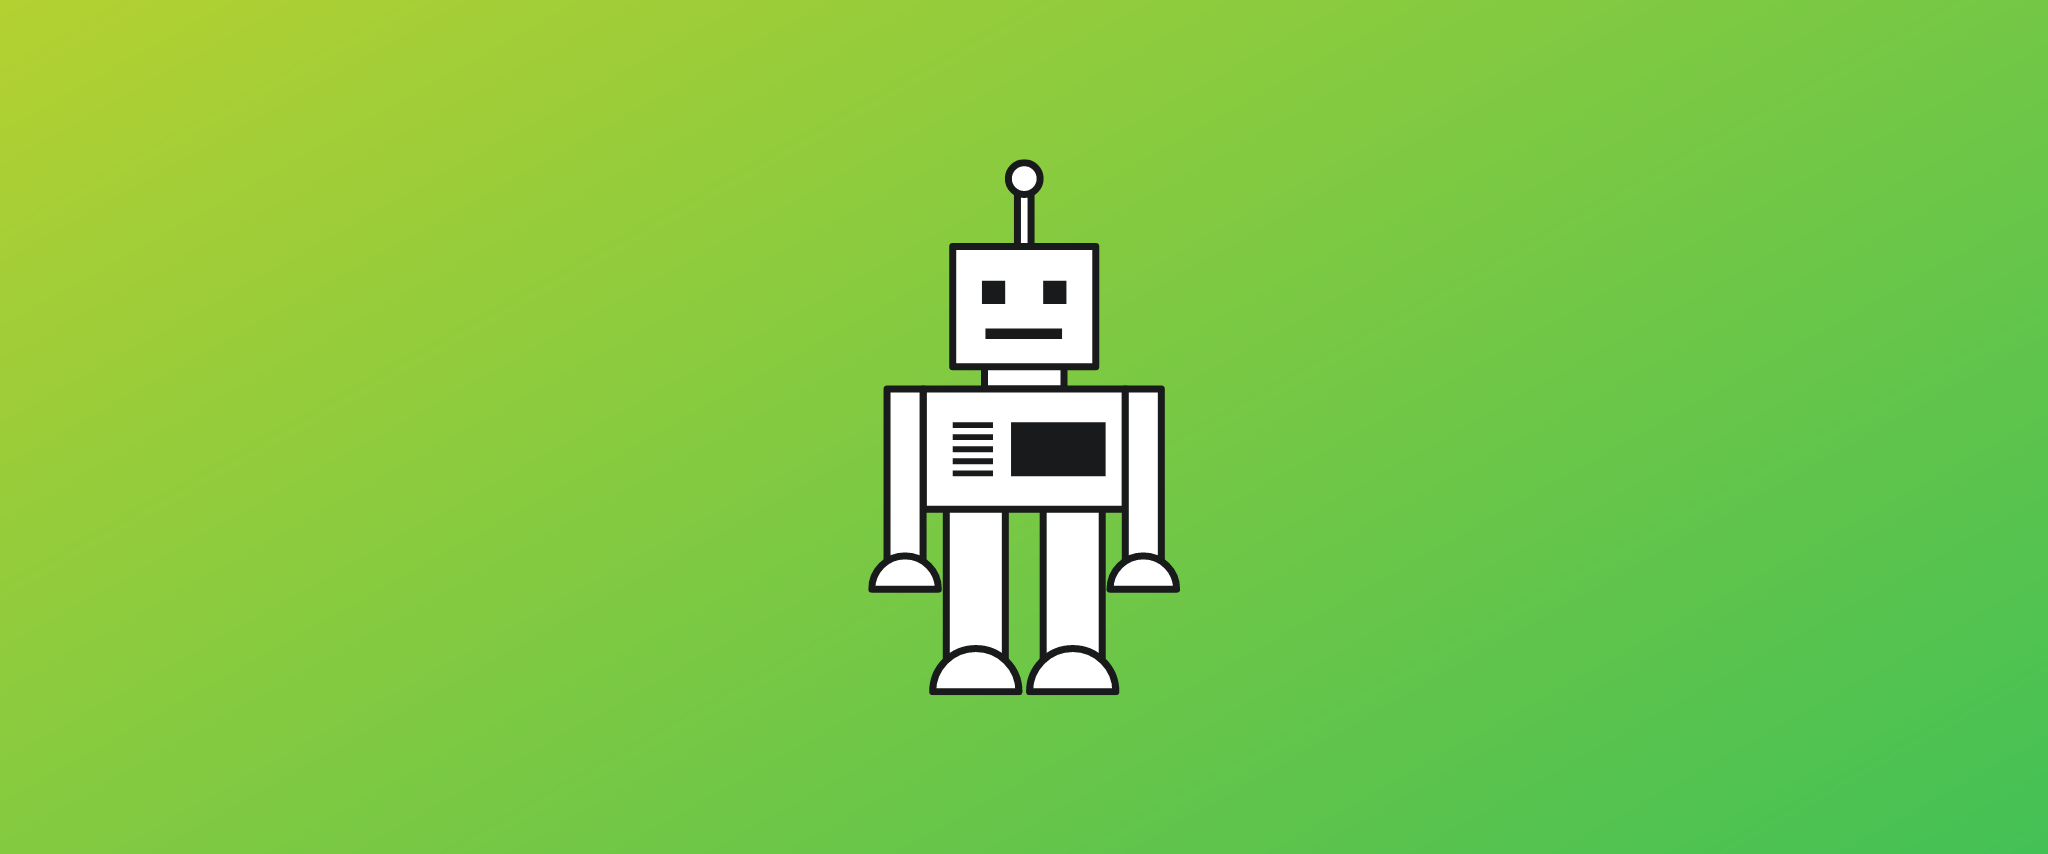 Click Bots: The Good, the Bad and the Ugly Truth On a Growing Problem for B2B Marketers